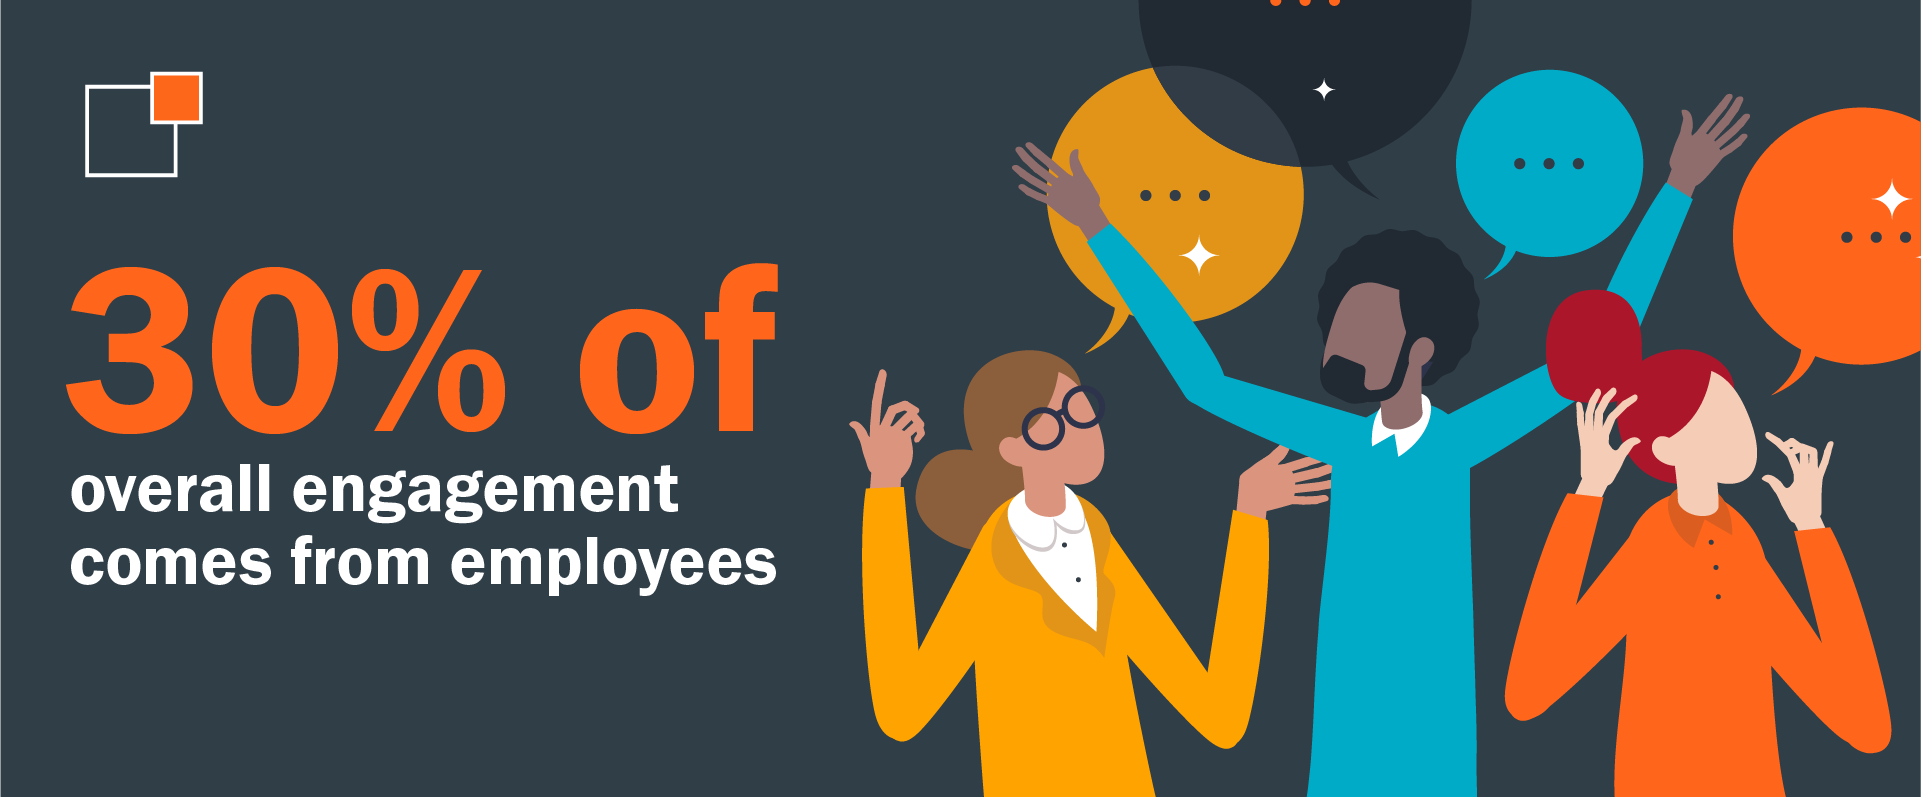 30%25 of overall engagement comes from employees